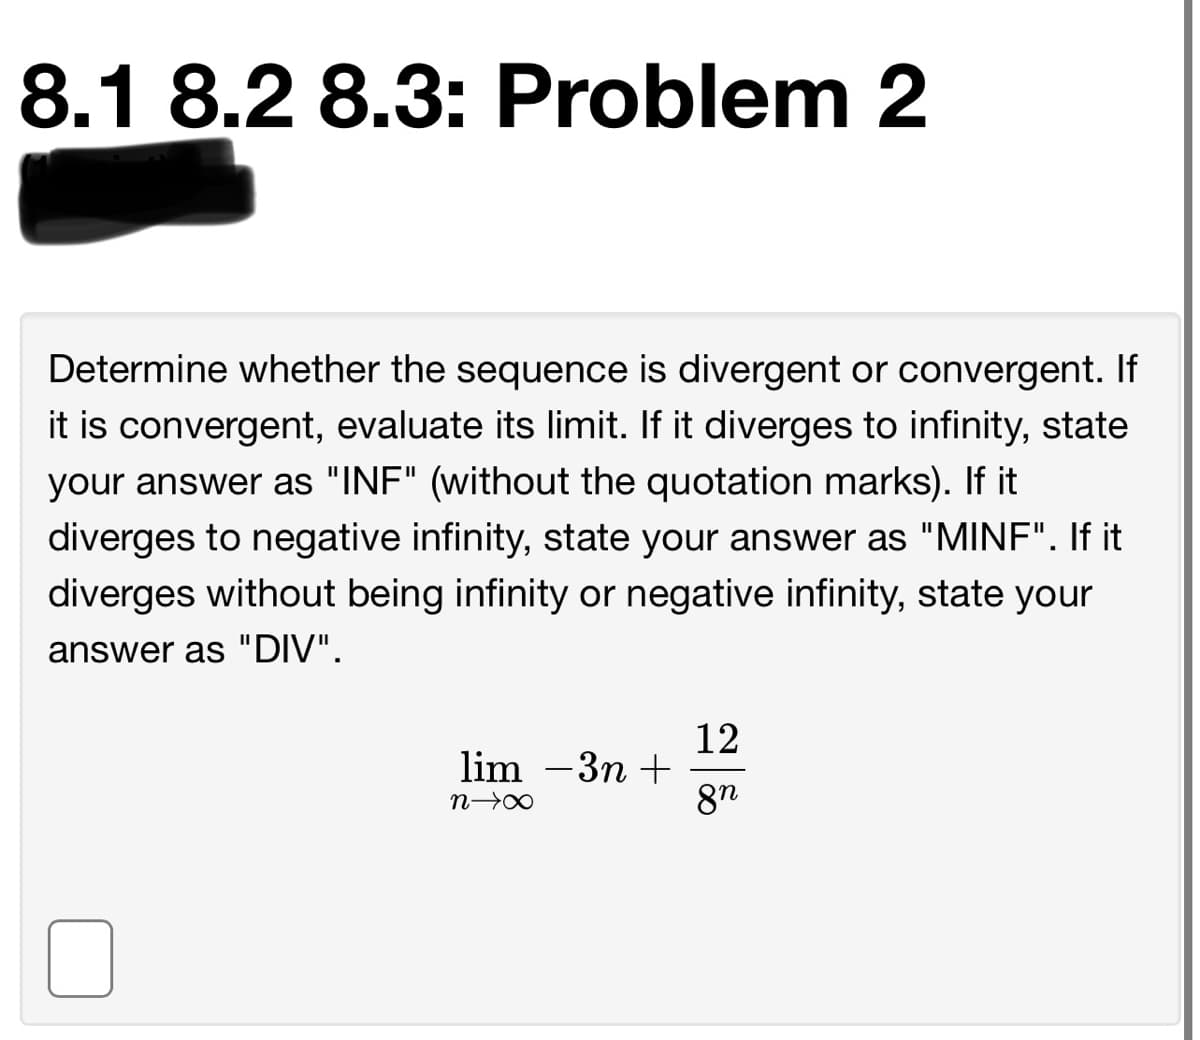 8.1 8.2 8.3: Problem 2
Determine whether the sequence is divergent or convergent. If
it is convergent, evaluate its limit. If it diverges to infinity, state
your answer as "INF" (without the quotation marks). If it
diverges to negative infinity, state your answer as "MINF". If it
diverges without being infinity or negative infinity, state your
answer as "DIV".
12
lim –3n +
8n
